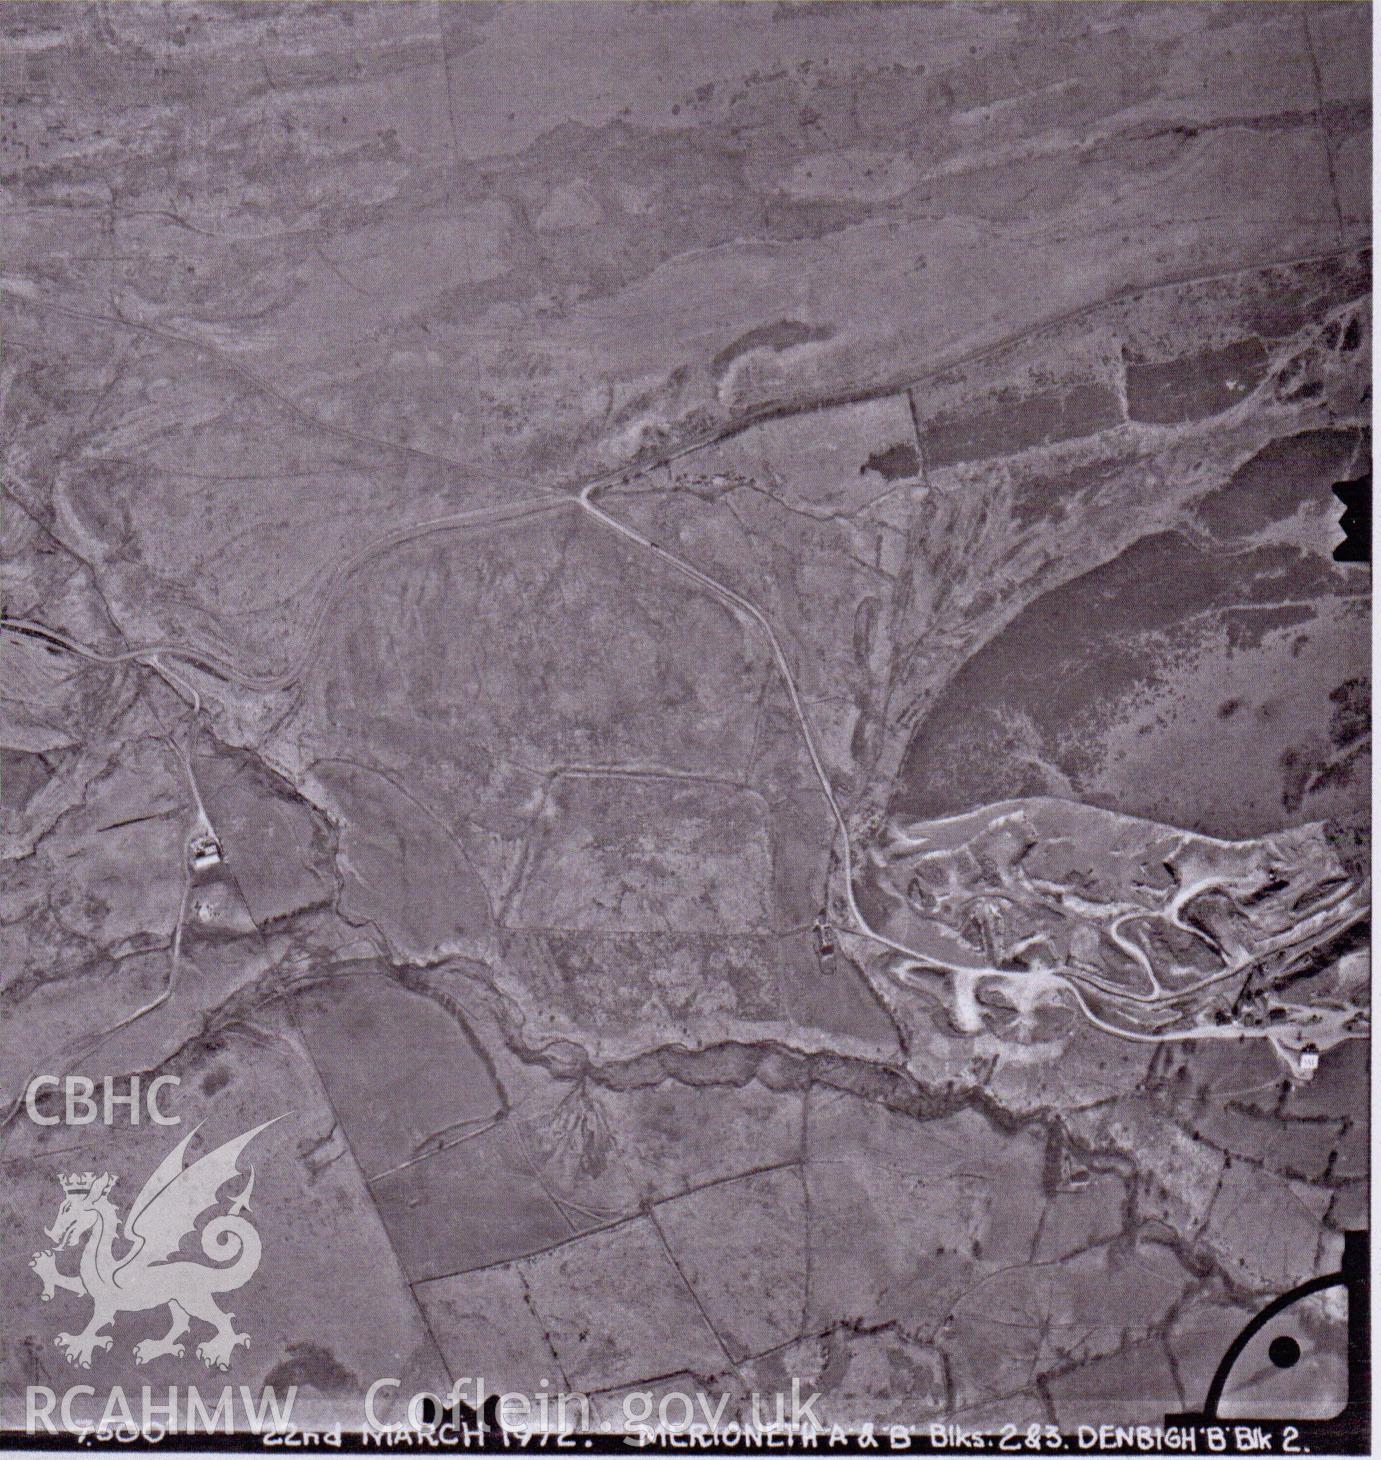 1972 OS aerial photograph showing assessment area for Tan y Foel Quarry, Cefn Coch, report no. 1089.